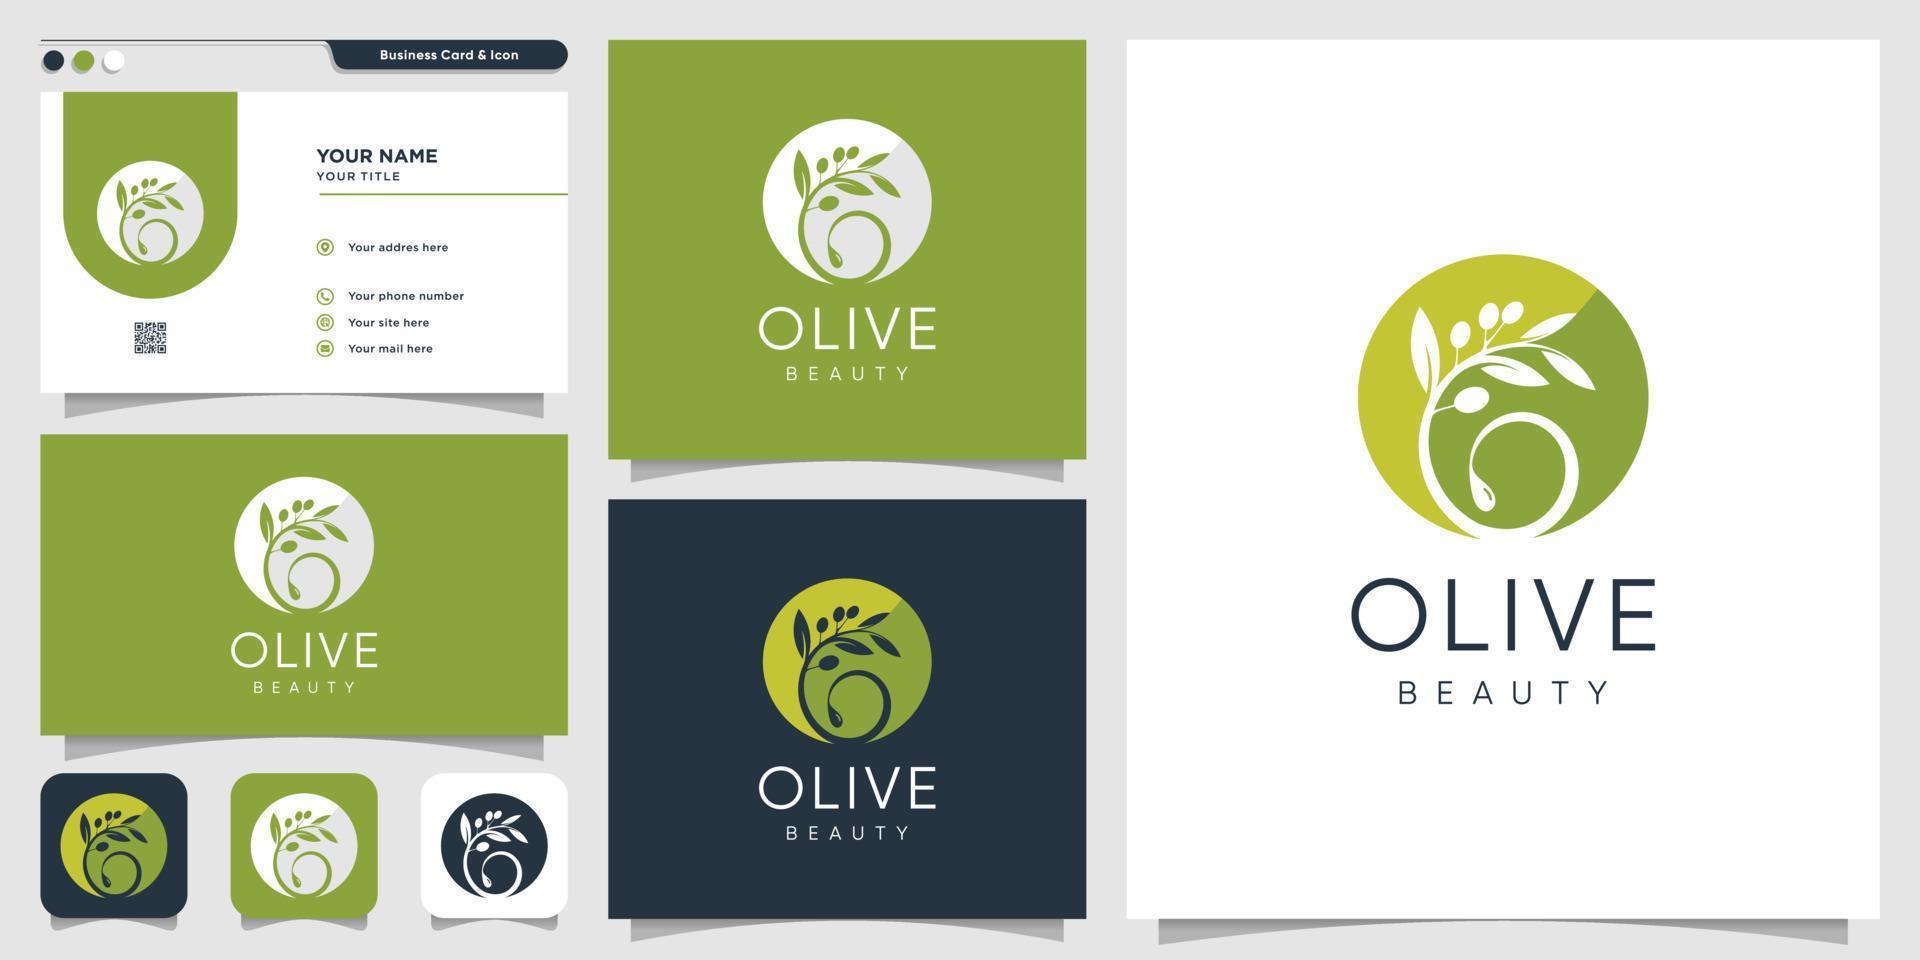 Olive logo and business card design template, brand, beauty, spa, cosmetics, Premium Vector